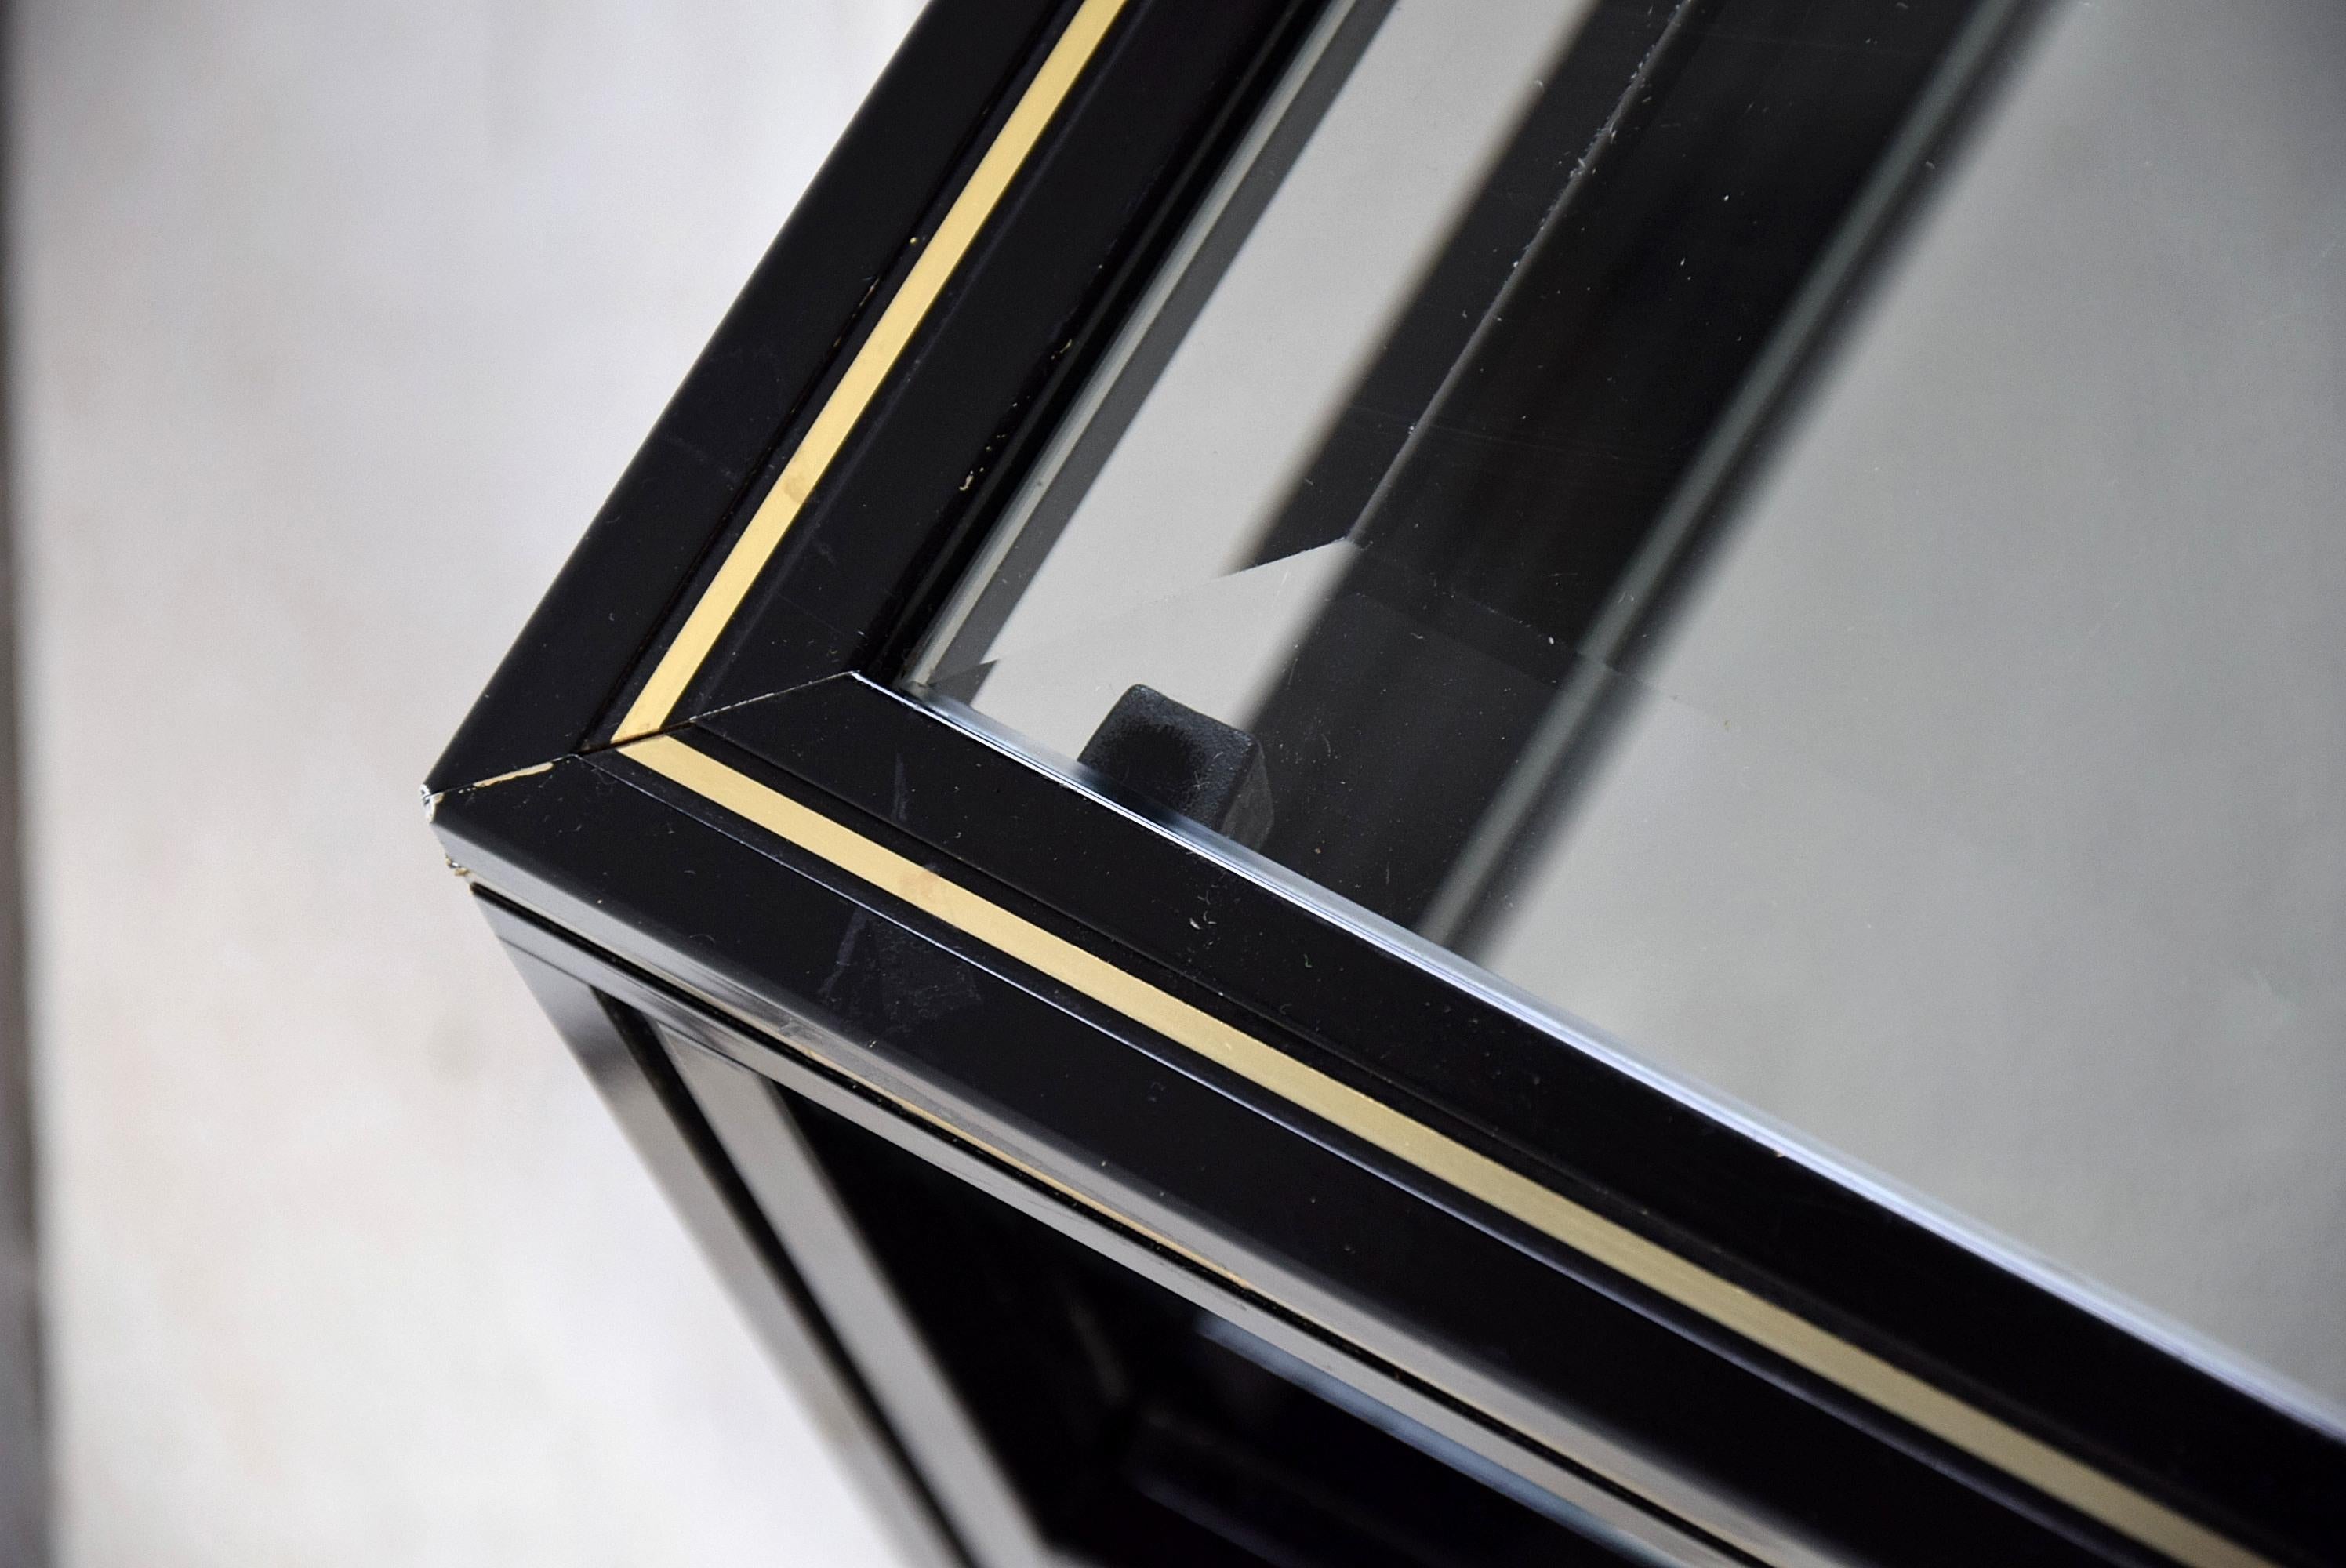 Stylish Hollywood regency black and gold aluminium two-tier coffee table designed by Pierre Vandel Paris in the 1970s.
The table will be shipped overseas insured in a custom made wooden crate. Cost of insured transport to the US crate included is